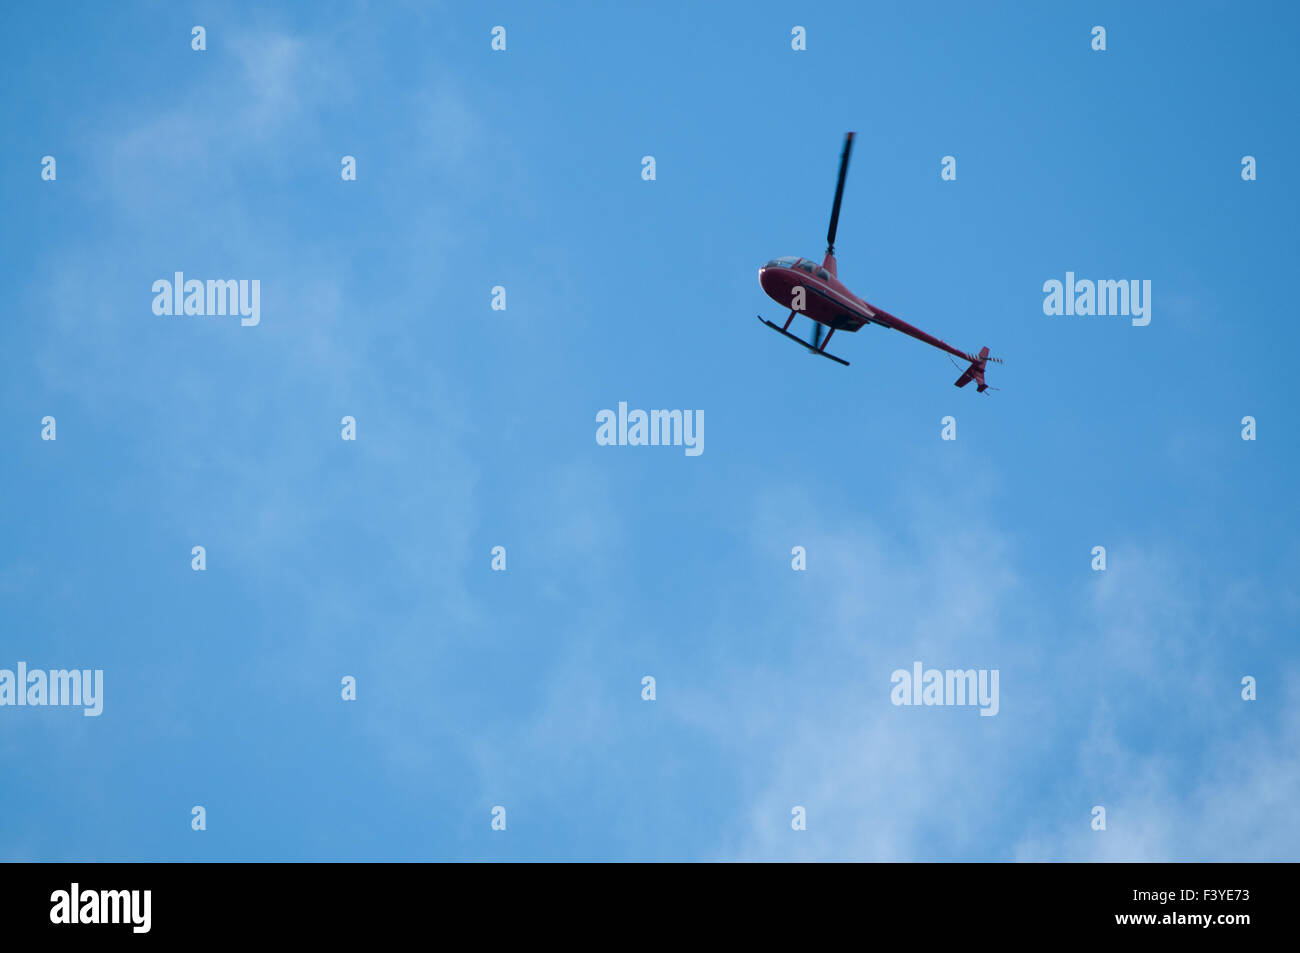 Helicopter high above on blue sky Stock Photo